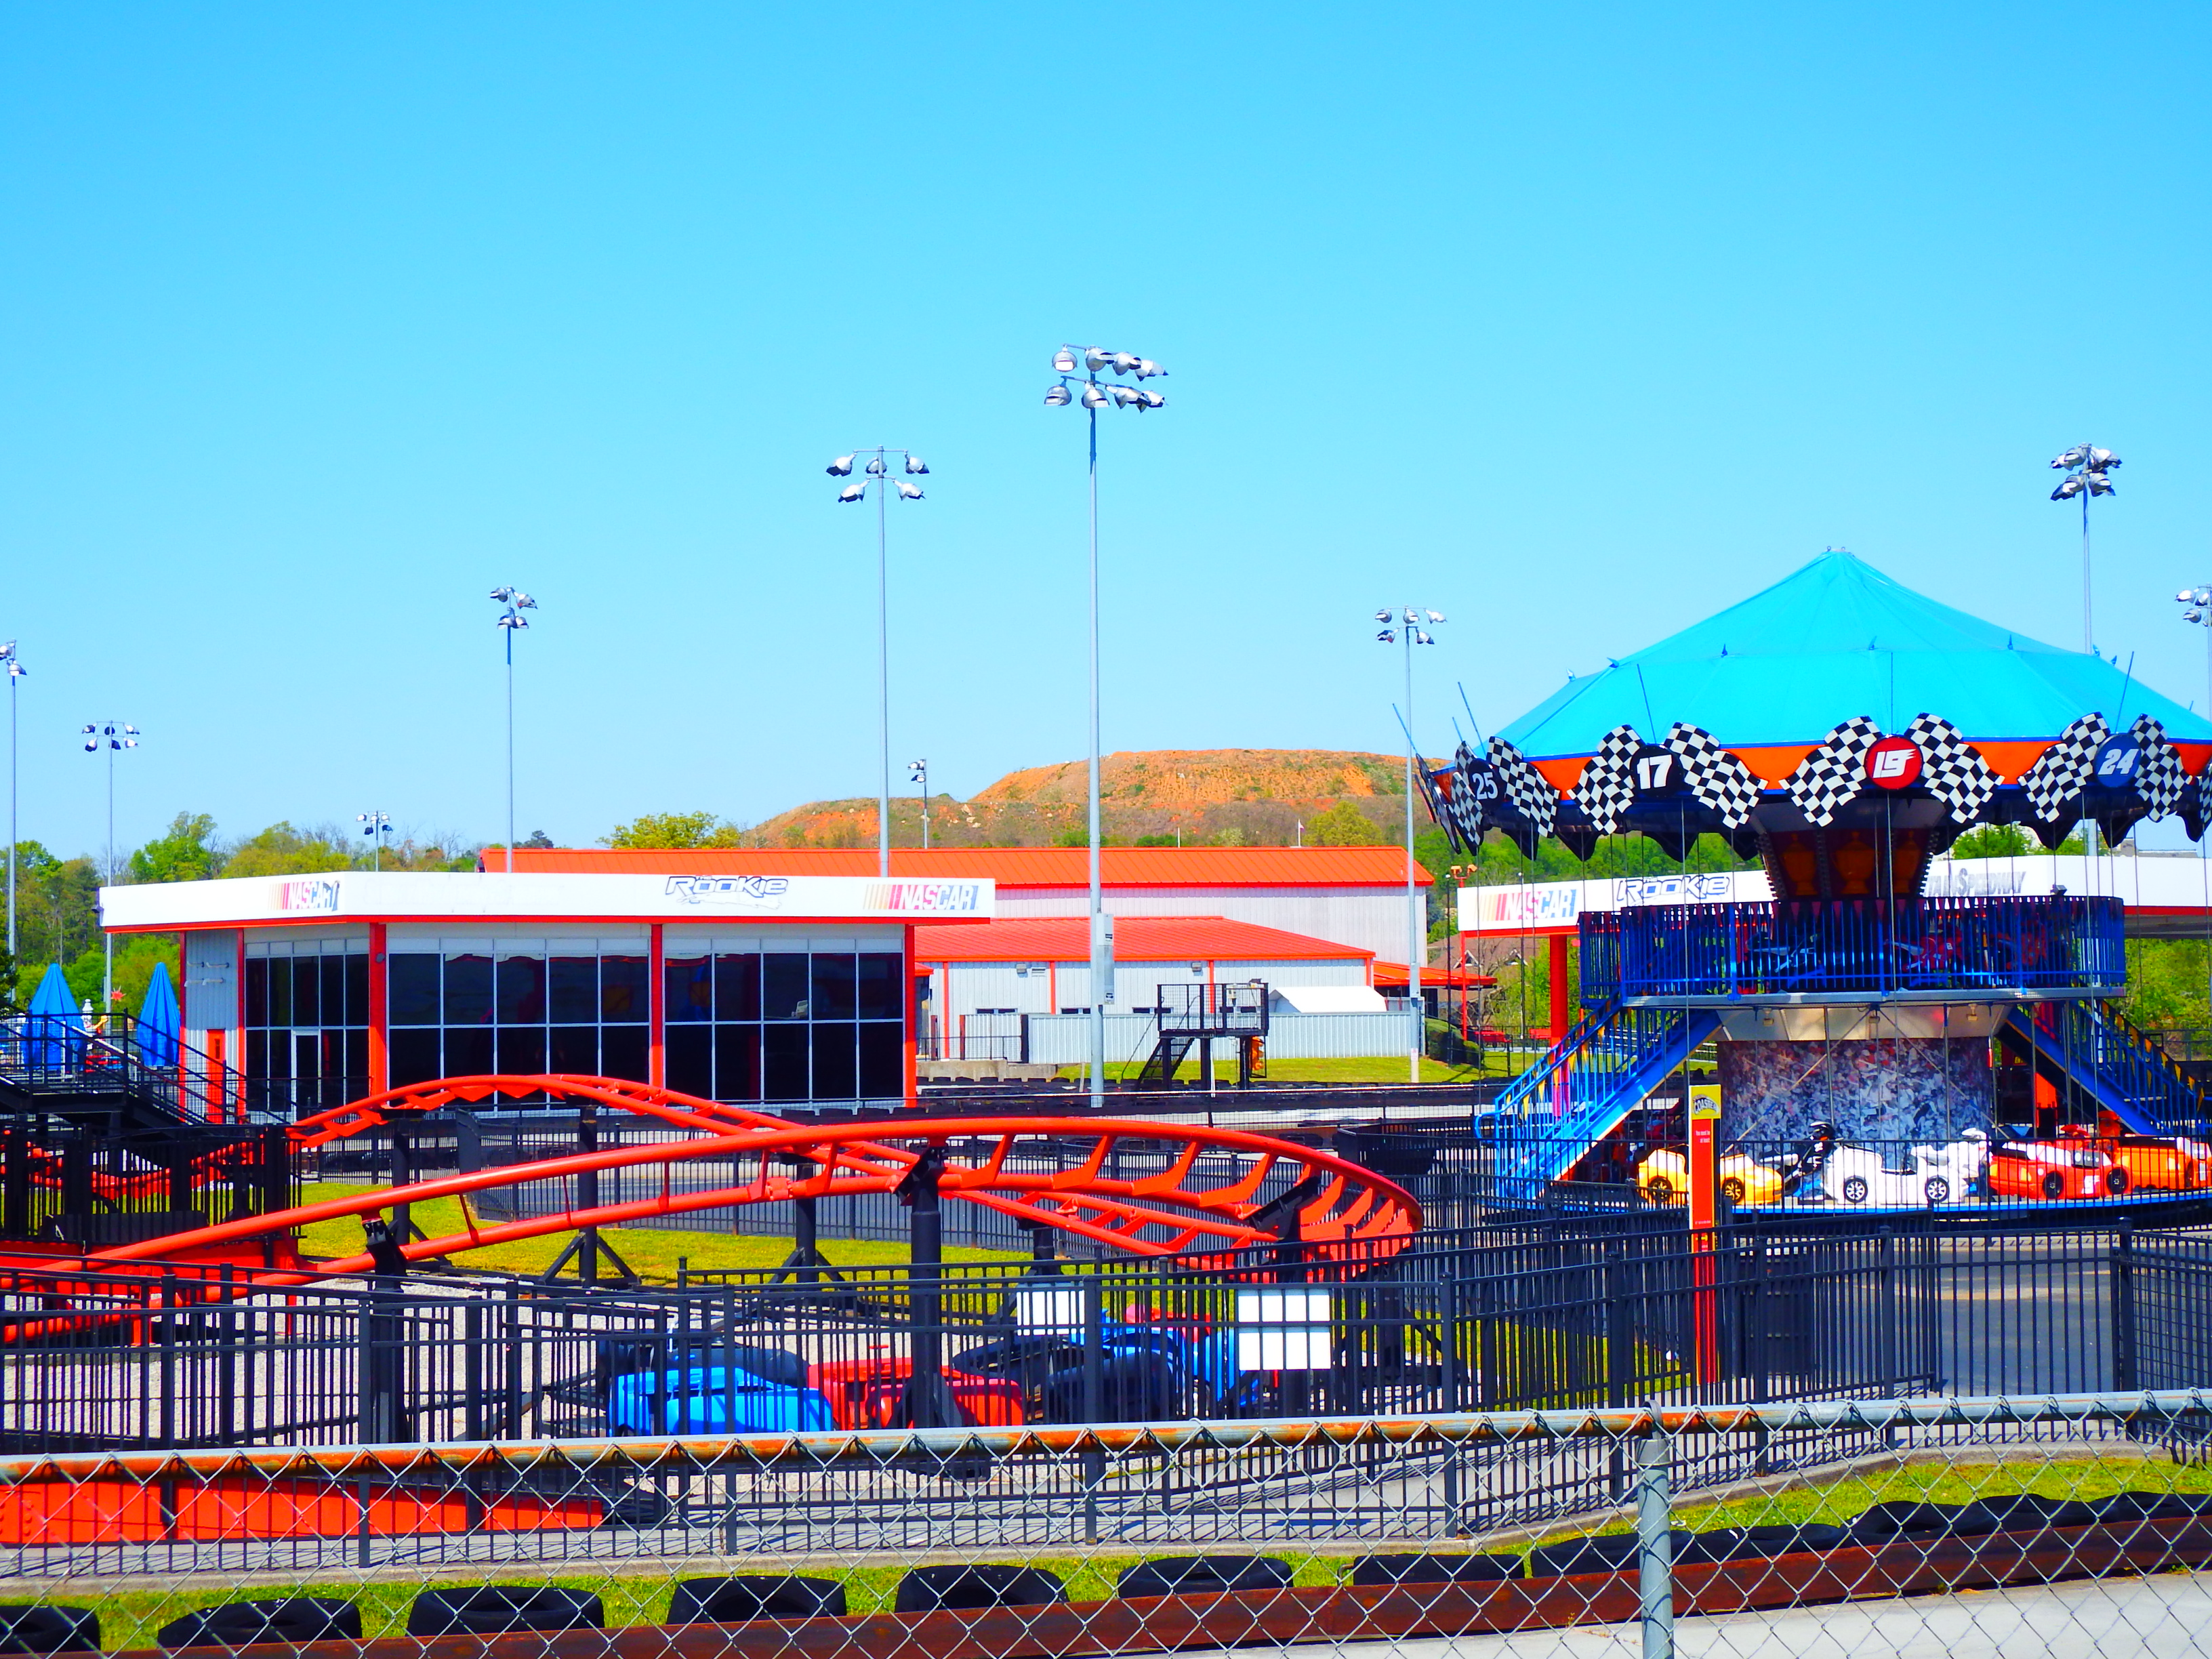 Nascar Speed Park in Pigeon is the place for family fun!